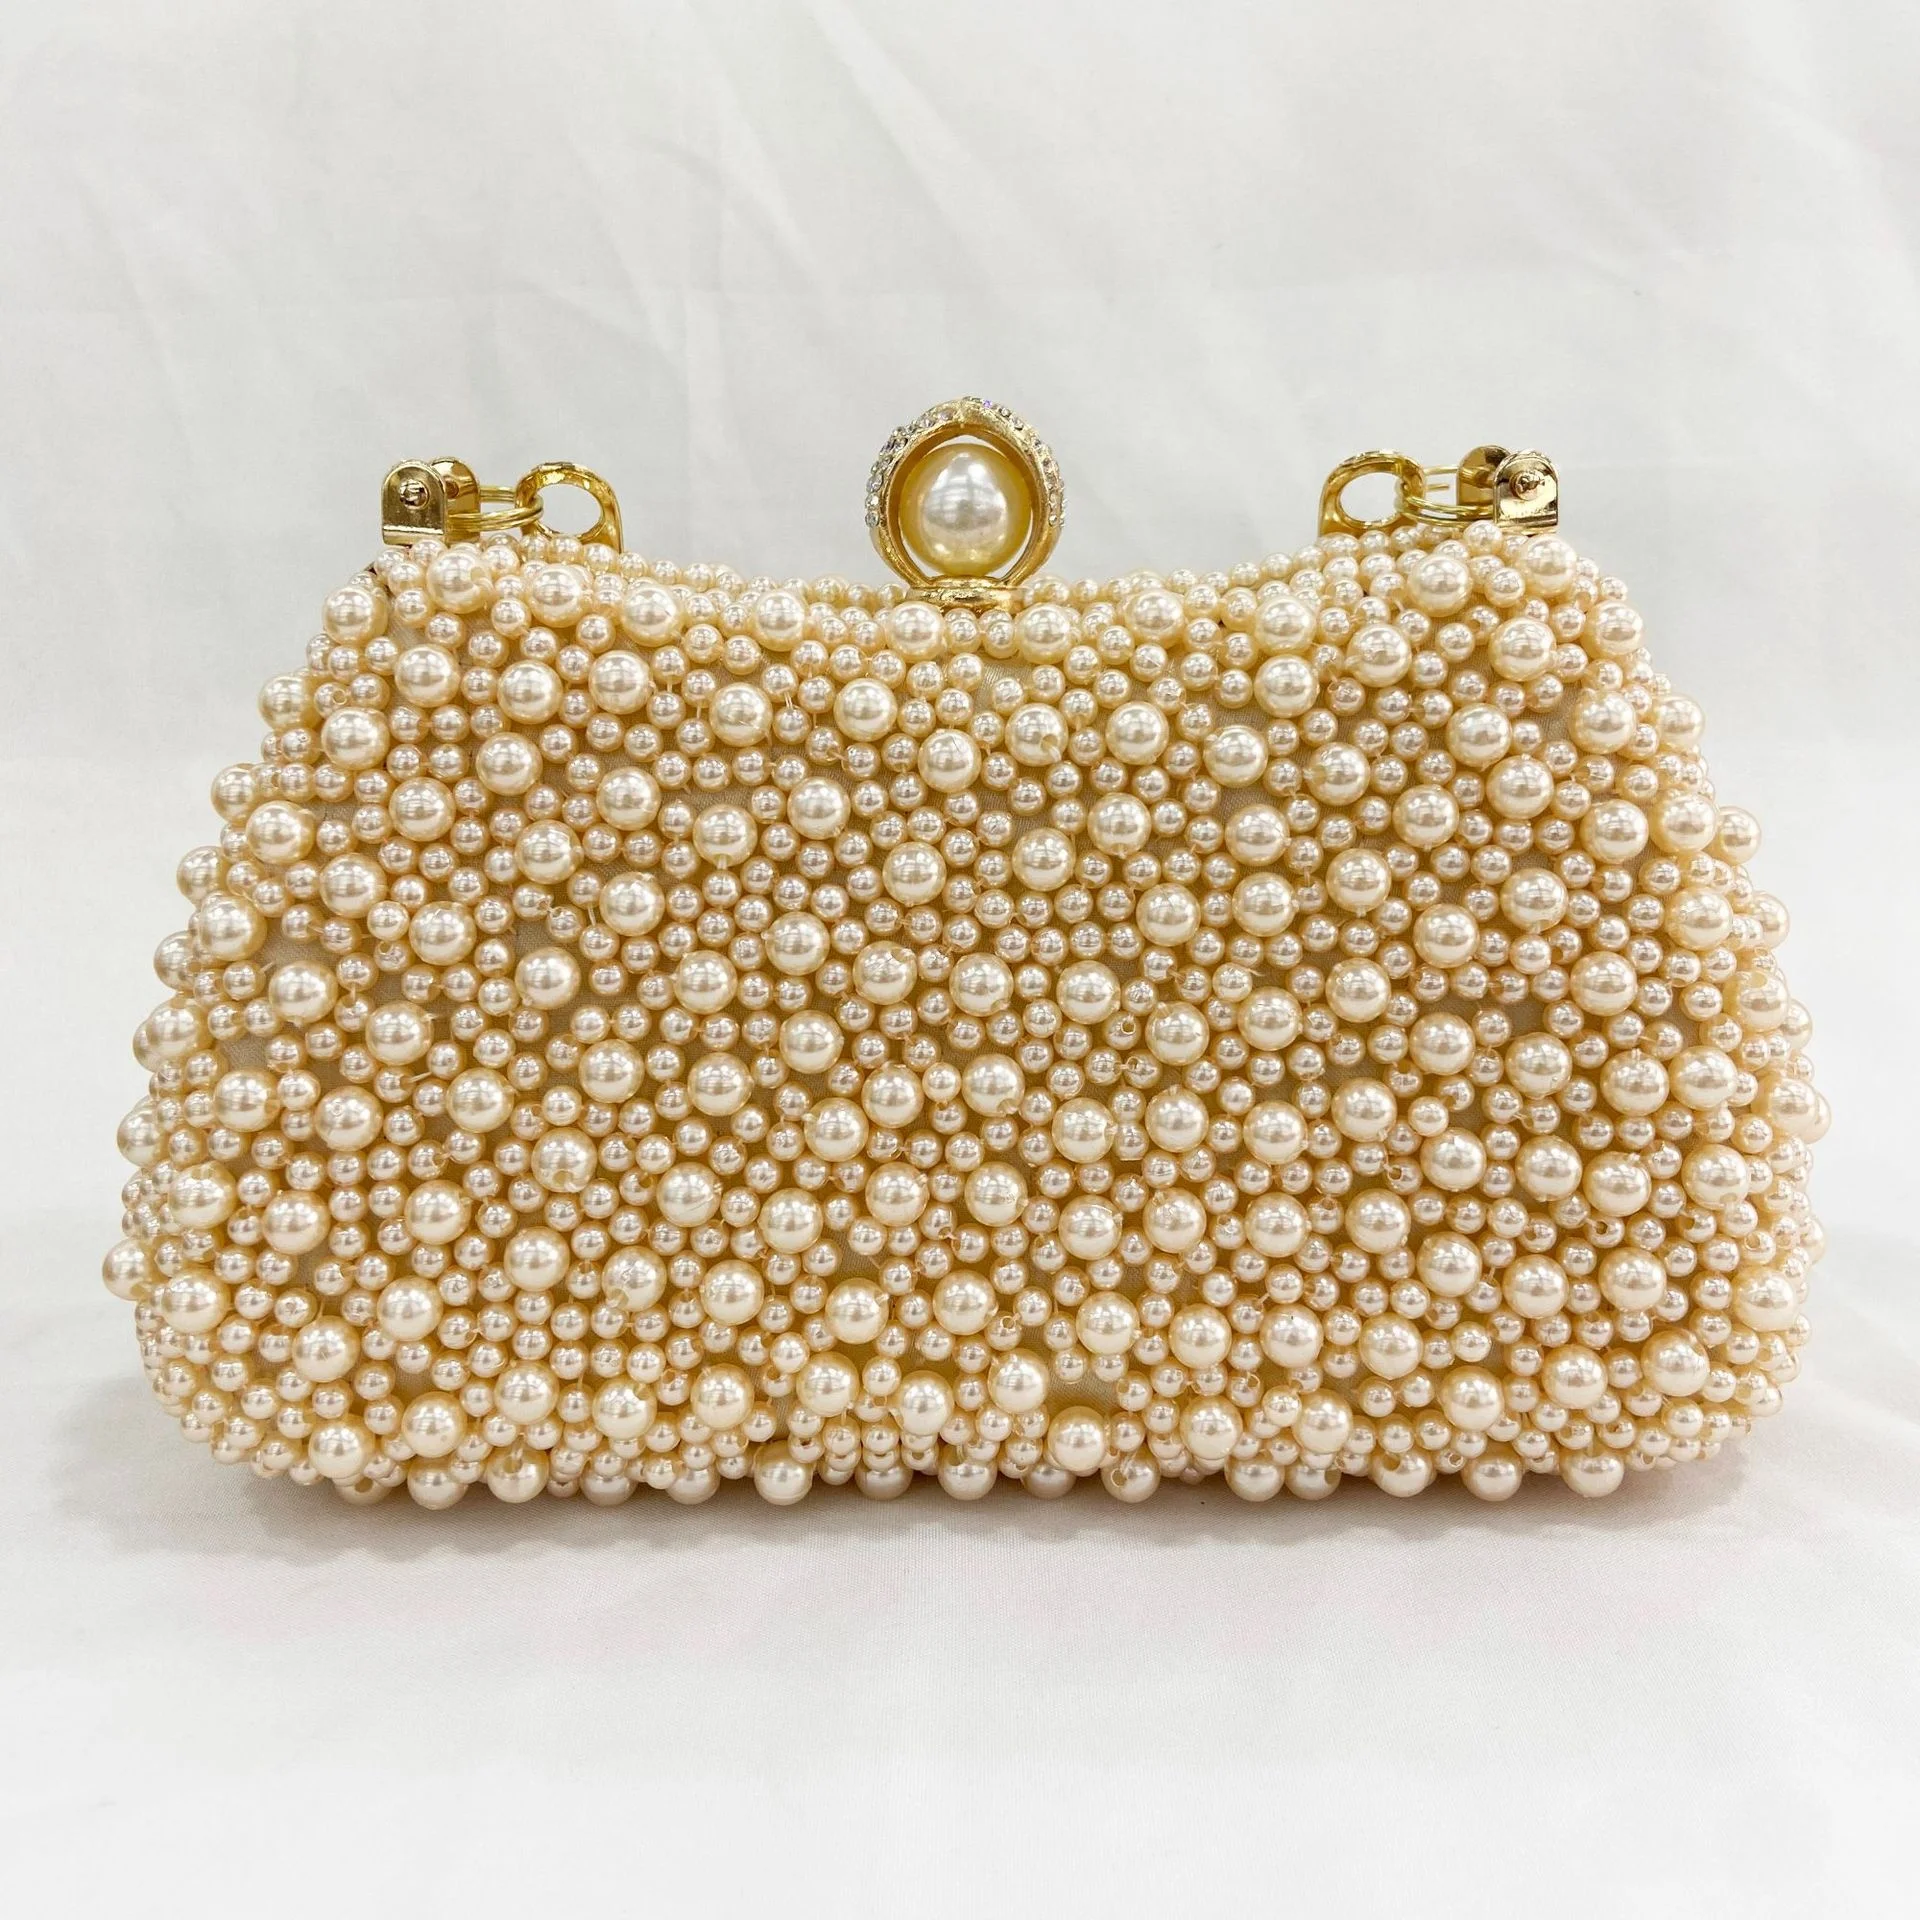 Luxury Pearl Clutch Beaded Evening Bag For Women White Diamond Handbag For  Parties, Weddings, And Events 230428 From Landong08, $26.21 | DHgate.Com